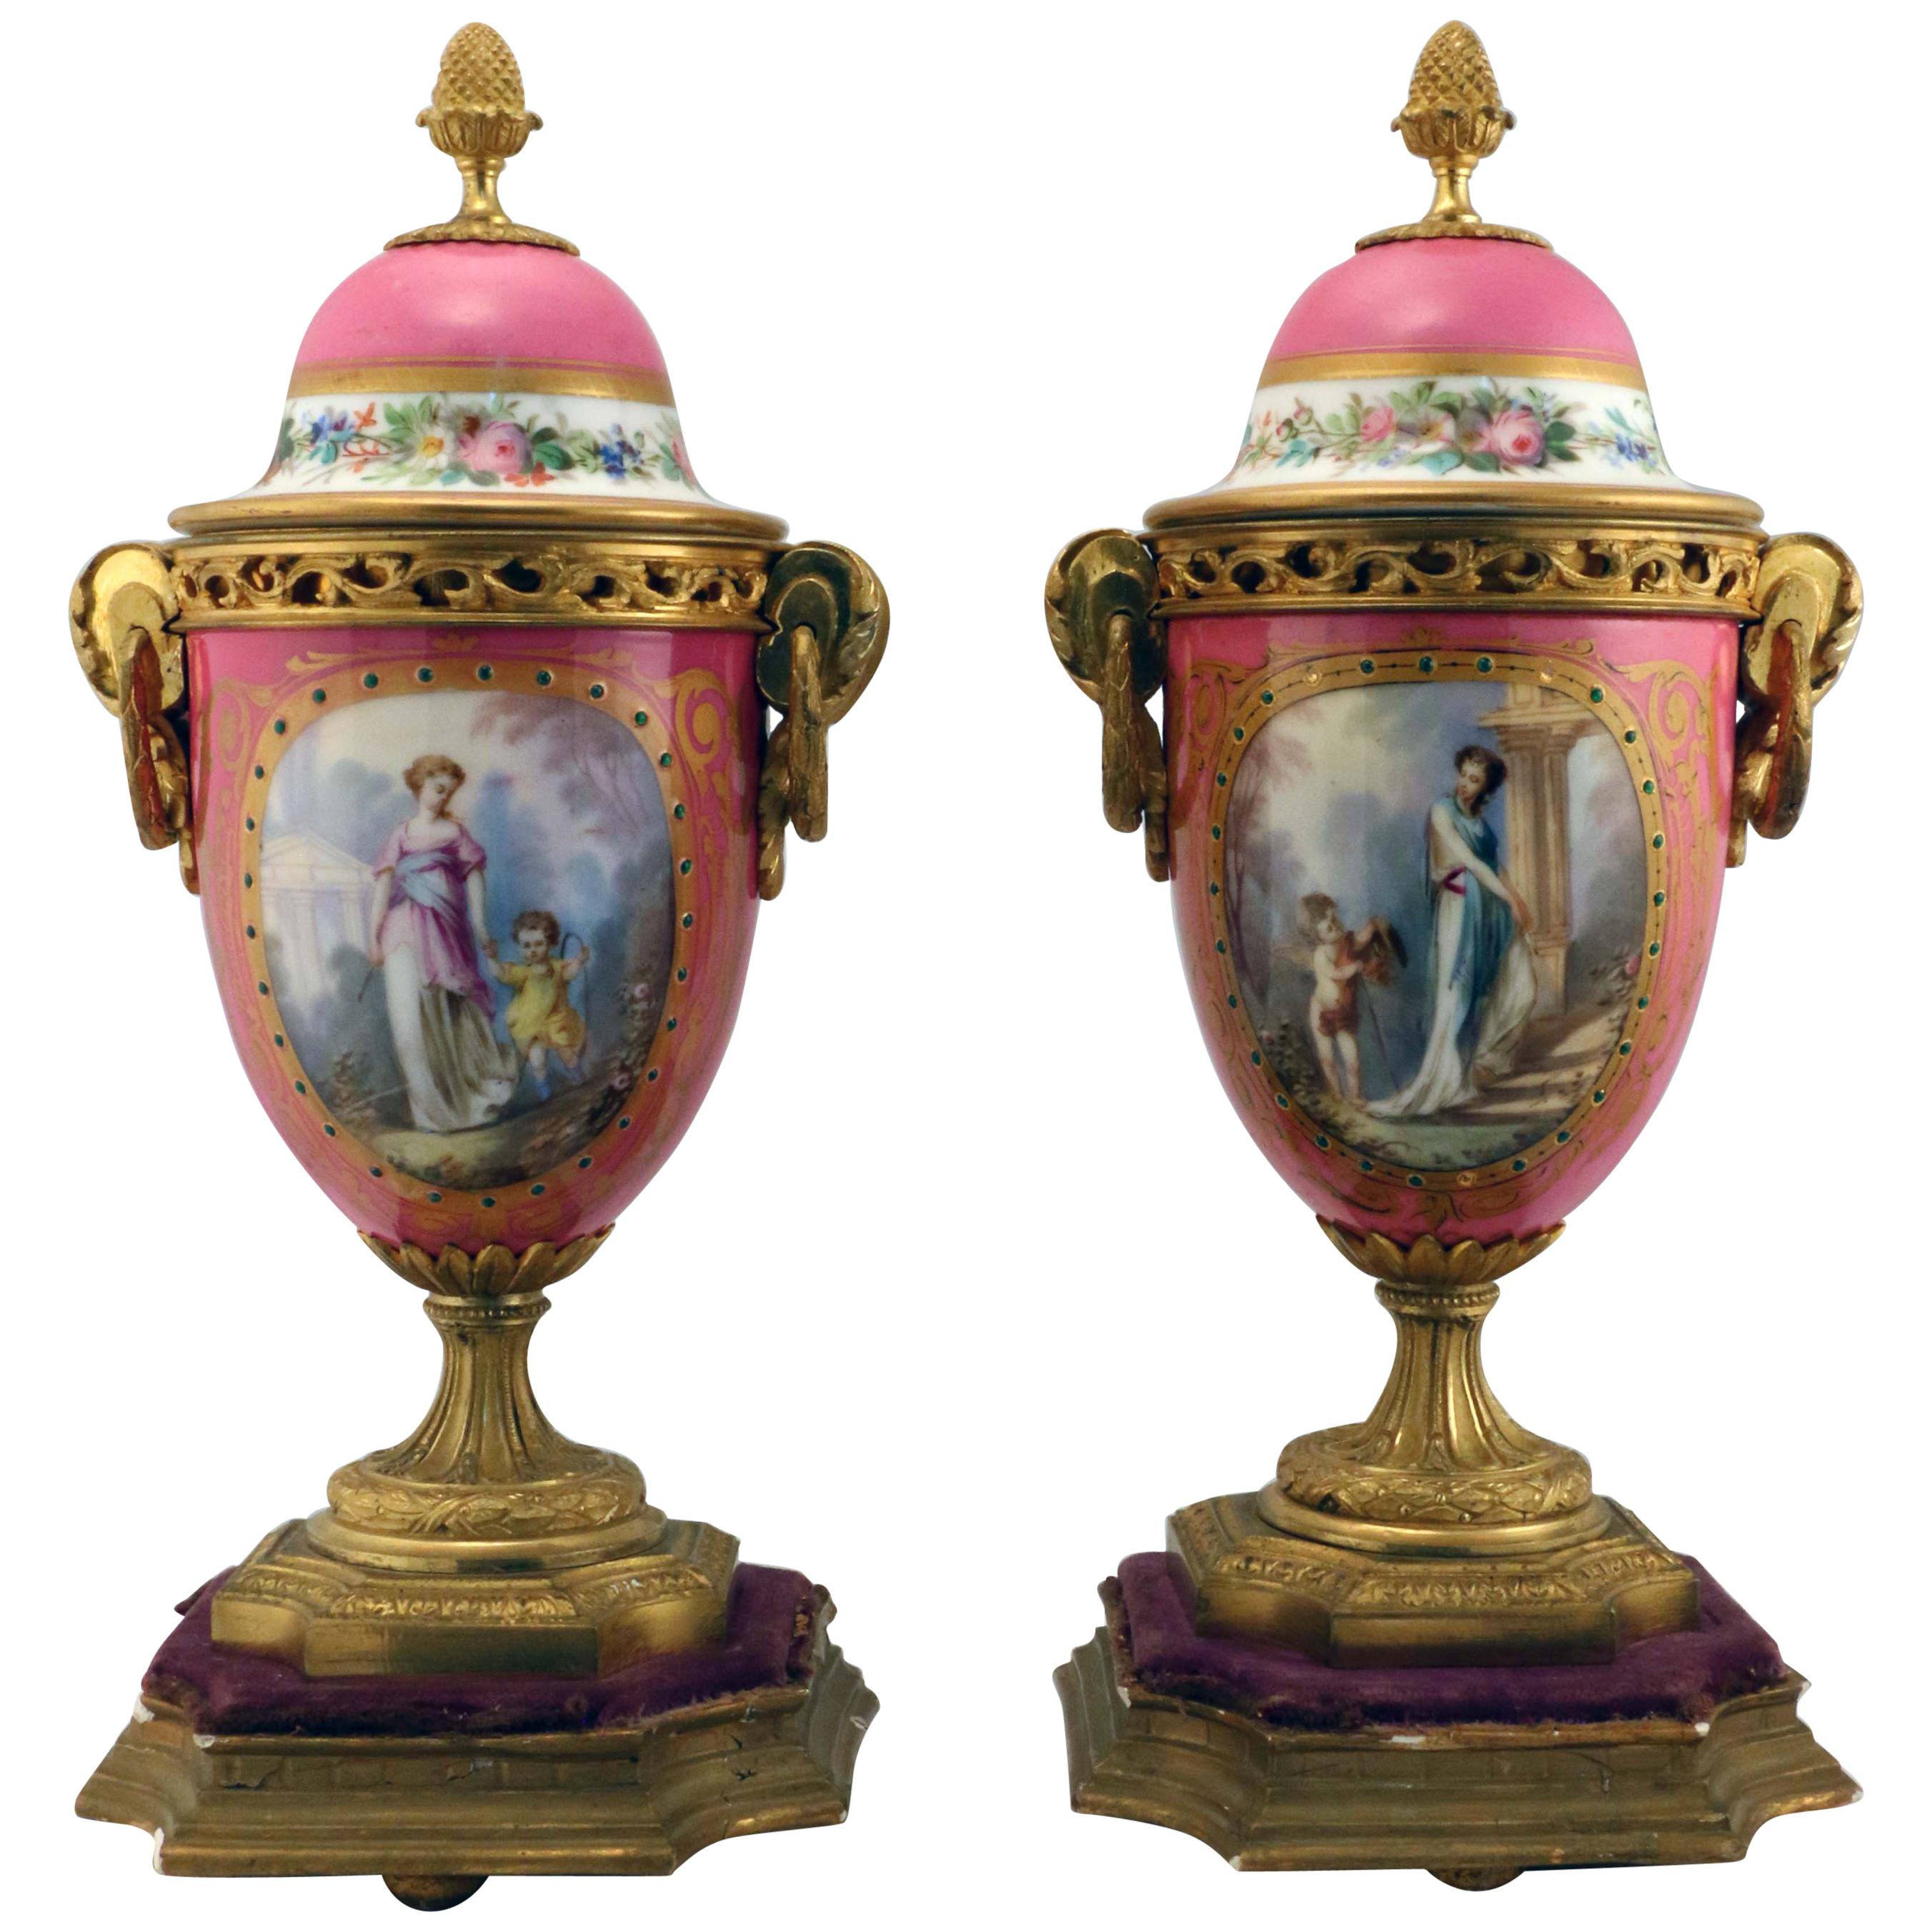 Pair of Louis XV Style Gilt Bronze Mounted Paris Pink Porcelain Covered Urns